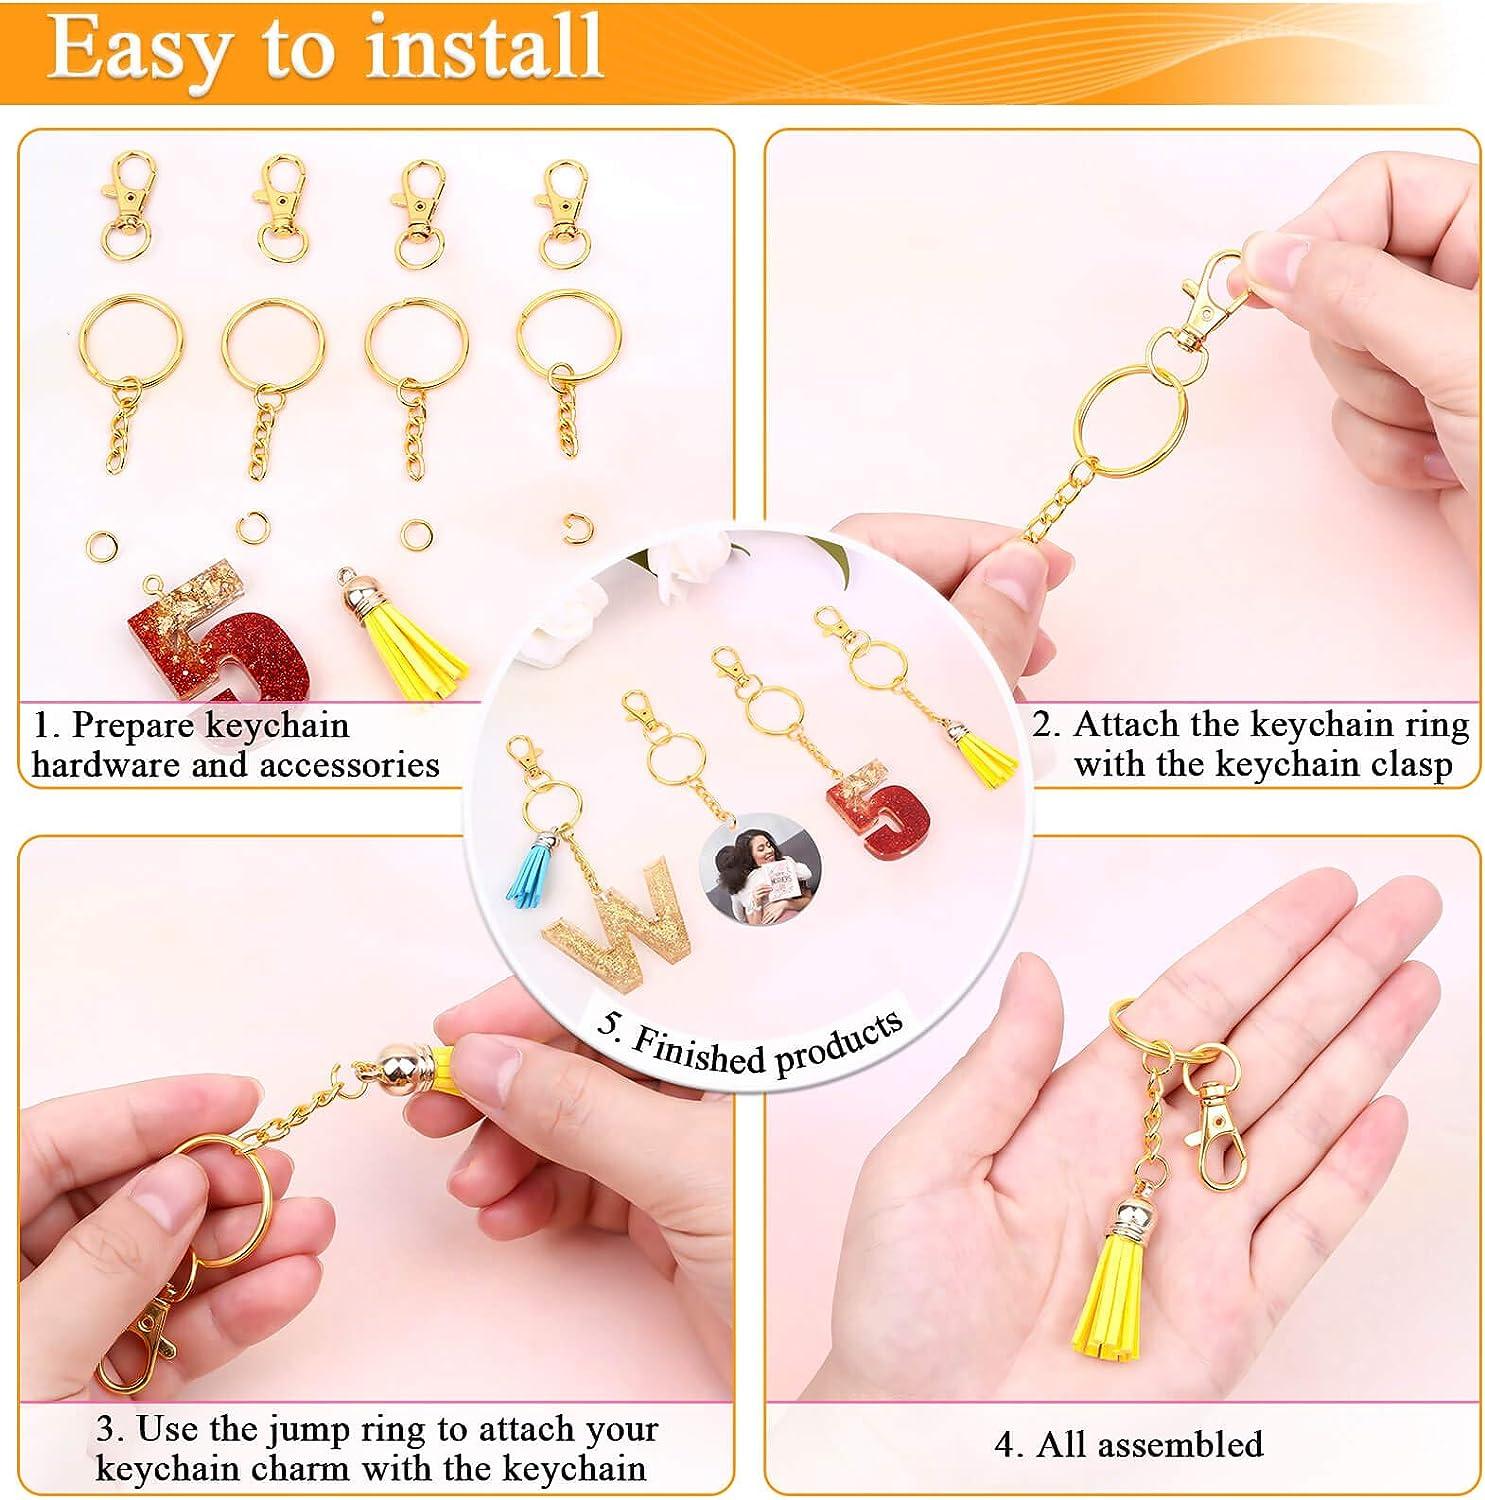 Keychain Rings for Crafts, Selizo 120pcs Gold Keychain Hardware